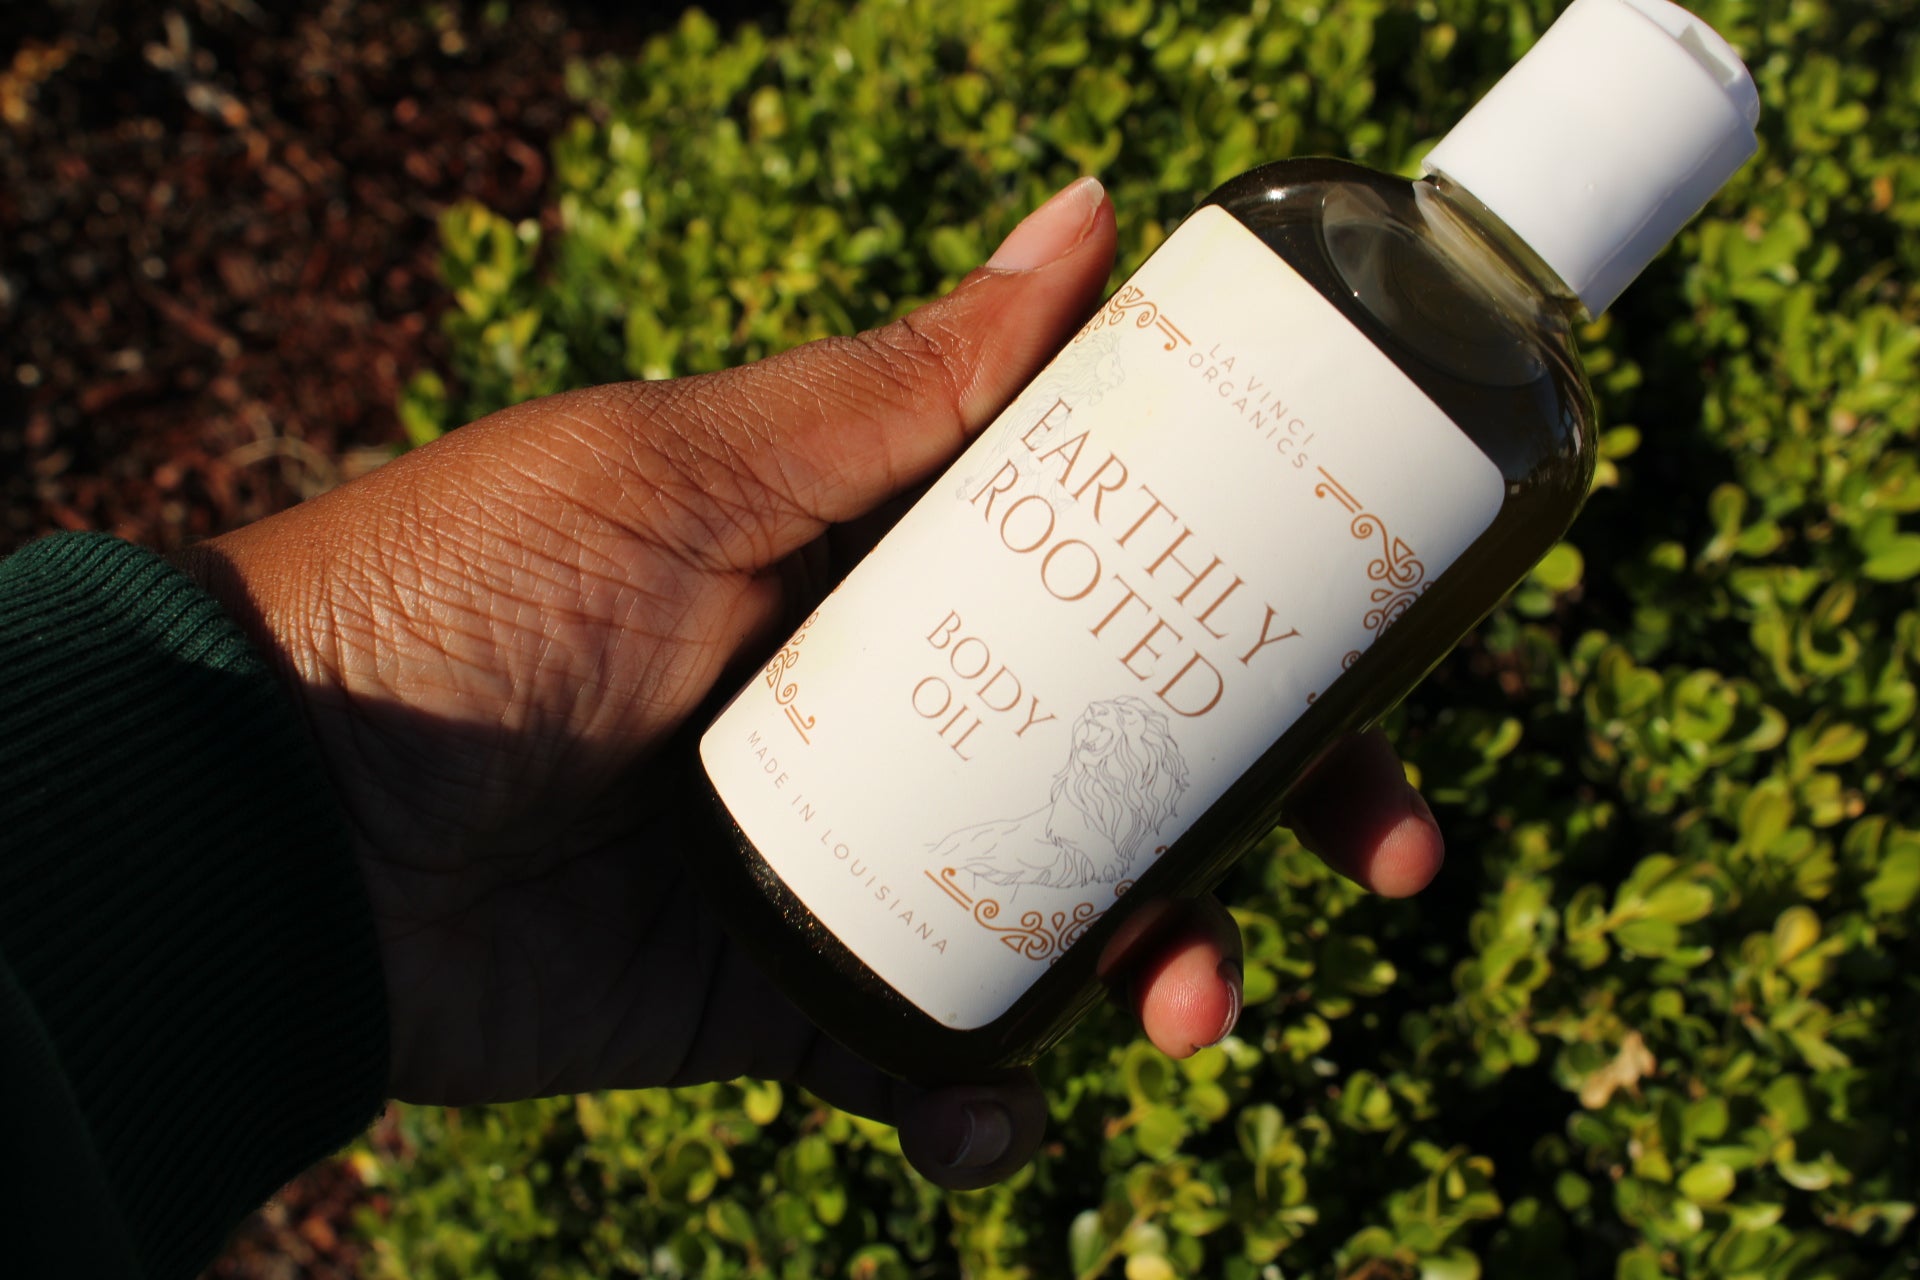 Earthly Rooted Body Oil - La Vinci’s